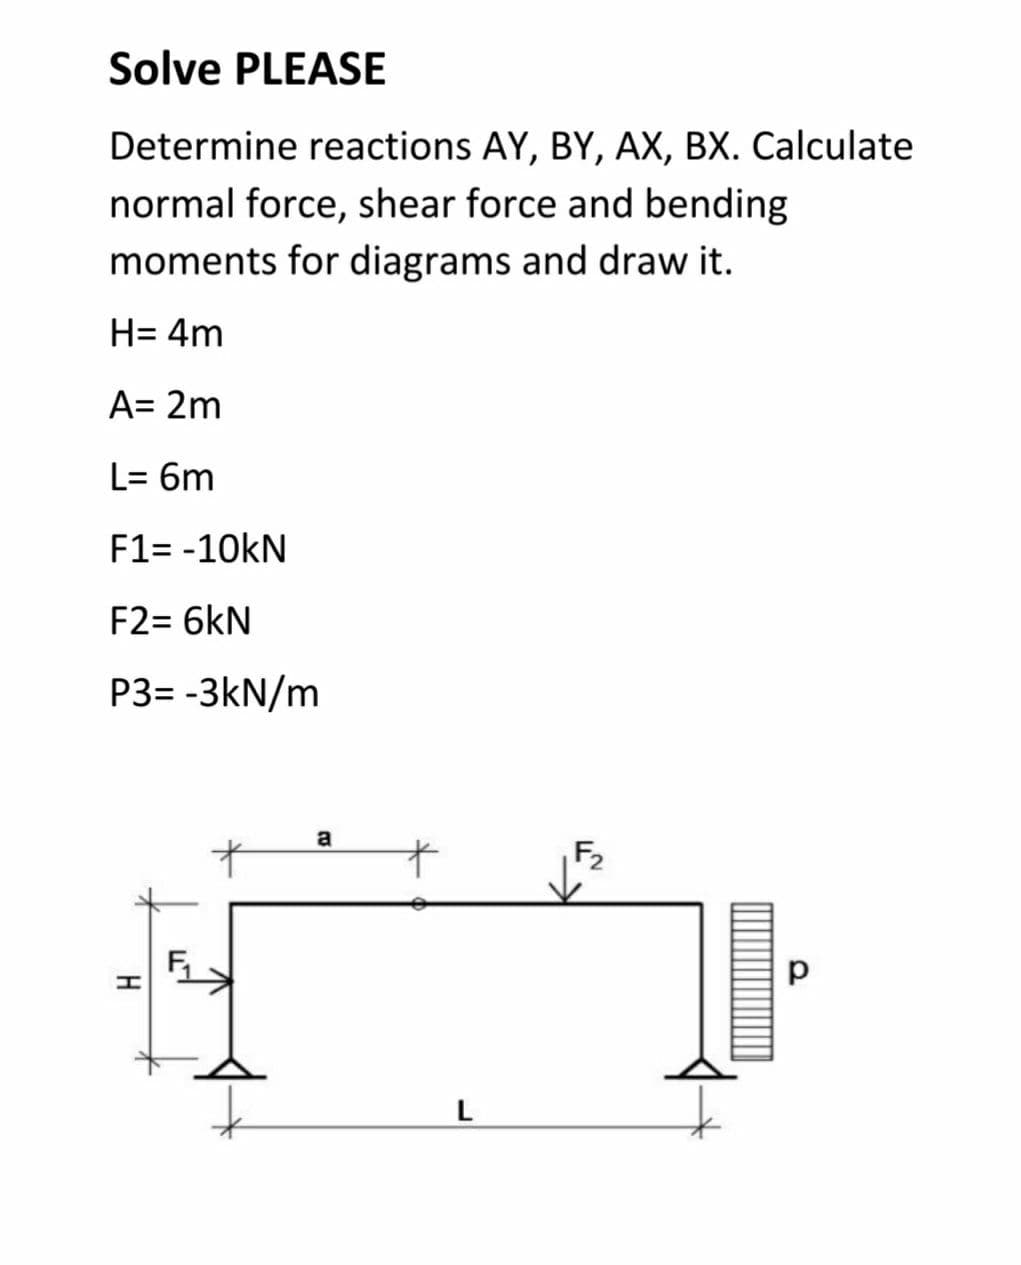 Solve PLEASE
Determine reactions AY, BY, AX, BX. Calculate
normal force, shear force and bending
moments for diagrams and draw it.
H= 4m
A= 2m
L= 6m
F1= -10KN
F2= 6kN
P3= -3kN/m
H
a
L
F₂
р